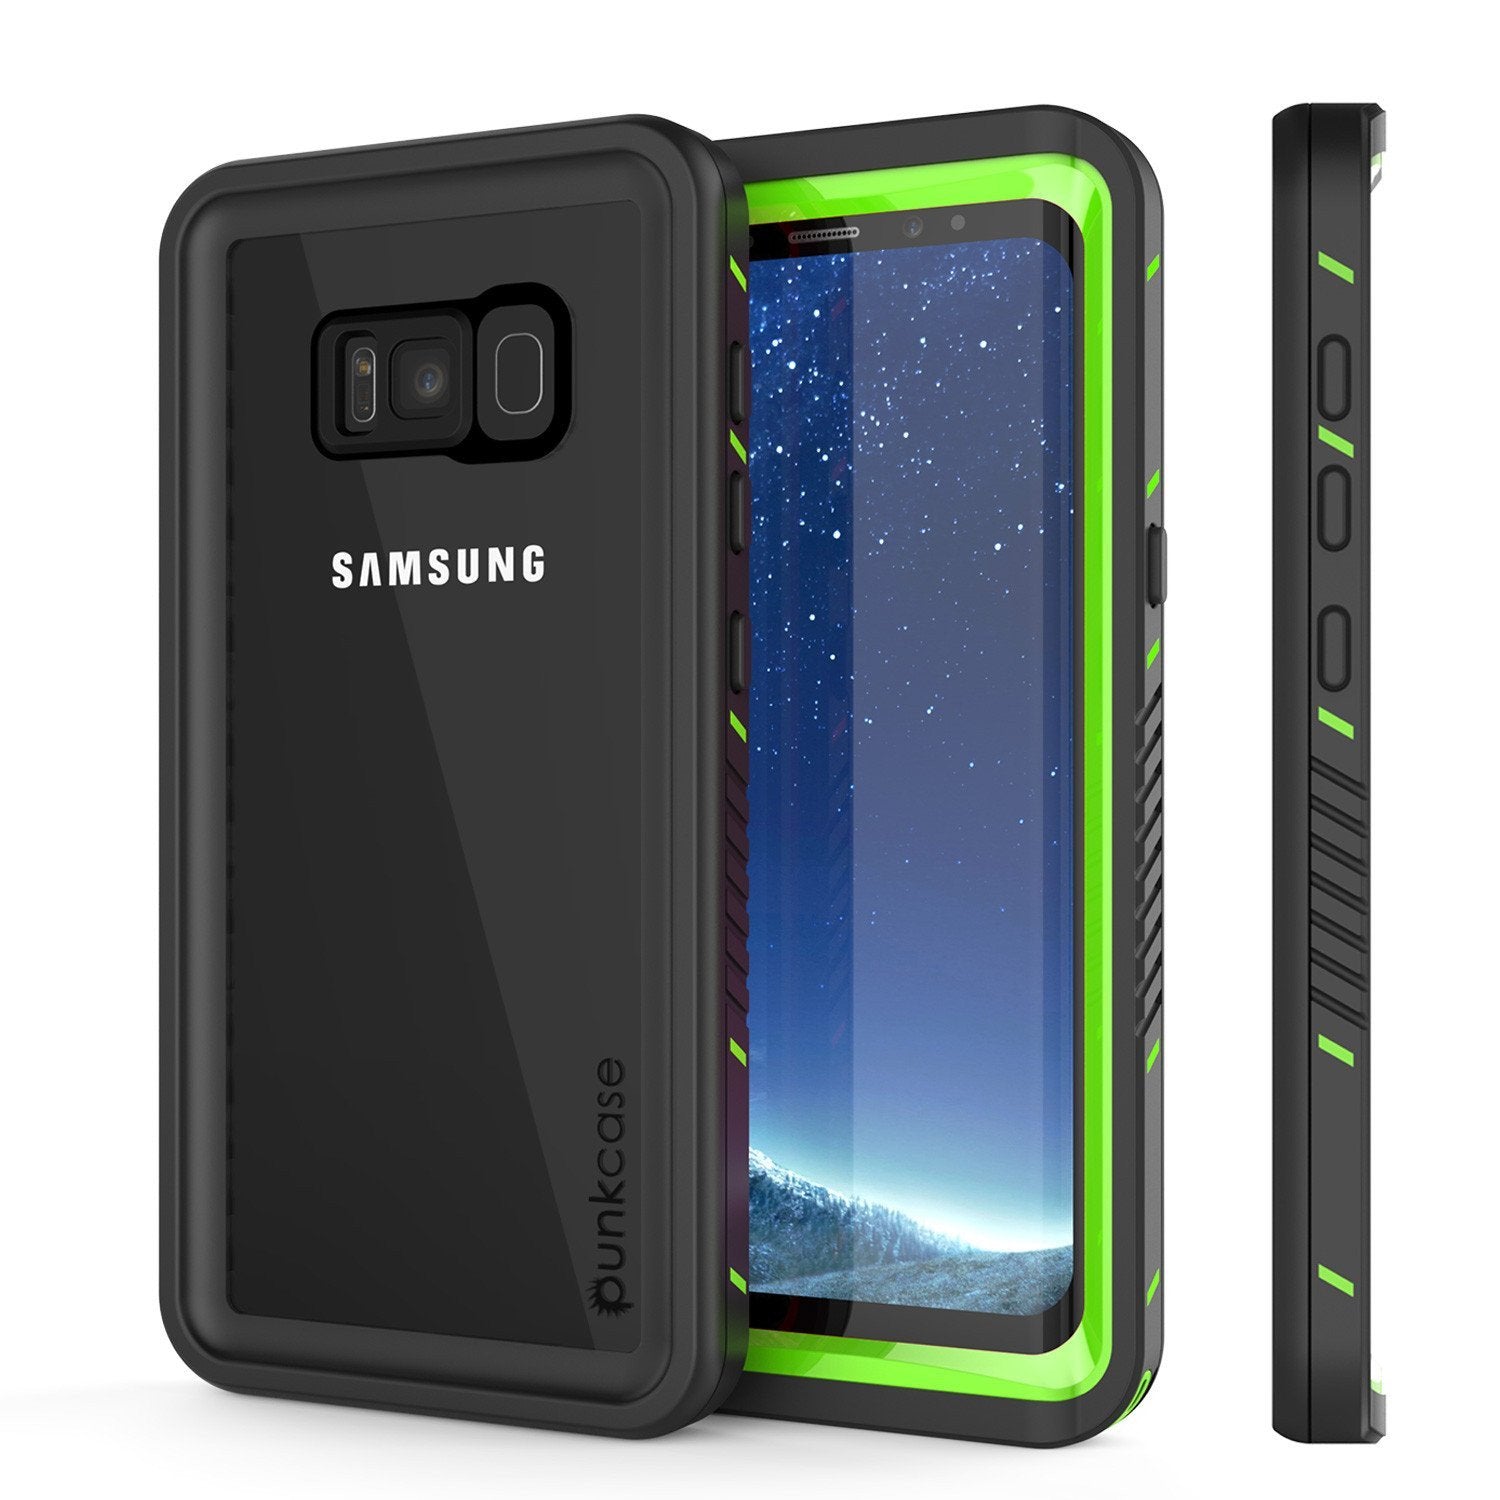 Galaxy S8 Waterproof Case, Punkcase [Extreme Series] [Slim Fit] [IP68 Certified] [Shockproof] [Snowproof] [Dirproof] Armor Cover W/ Built In Screen Protector for Samsung Galaxy S8 [Green]